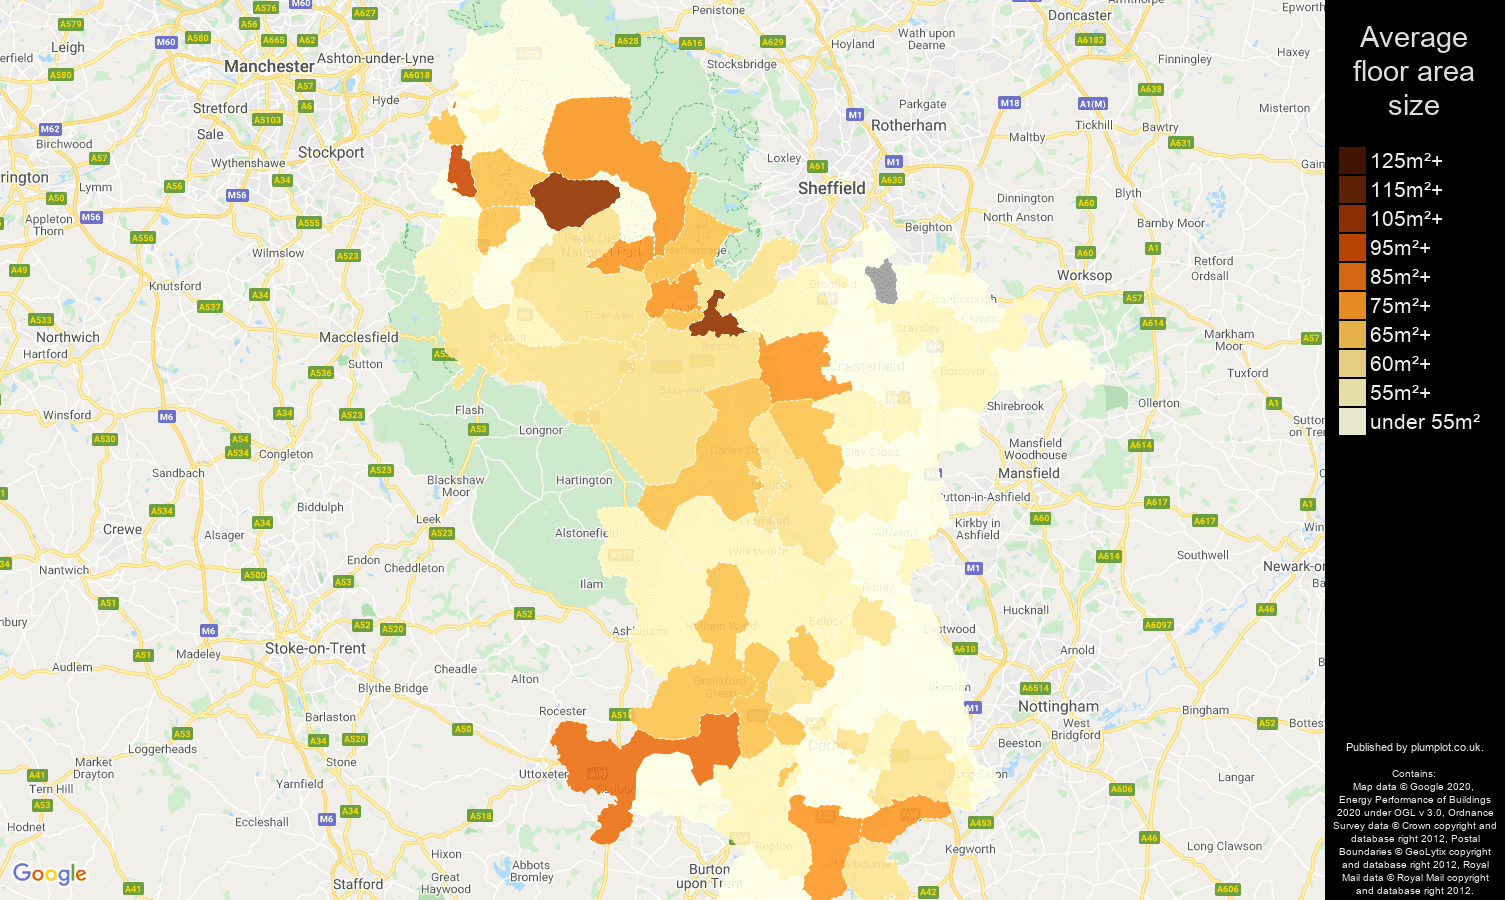 Derbyshire map of average floor area size of flats